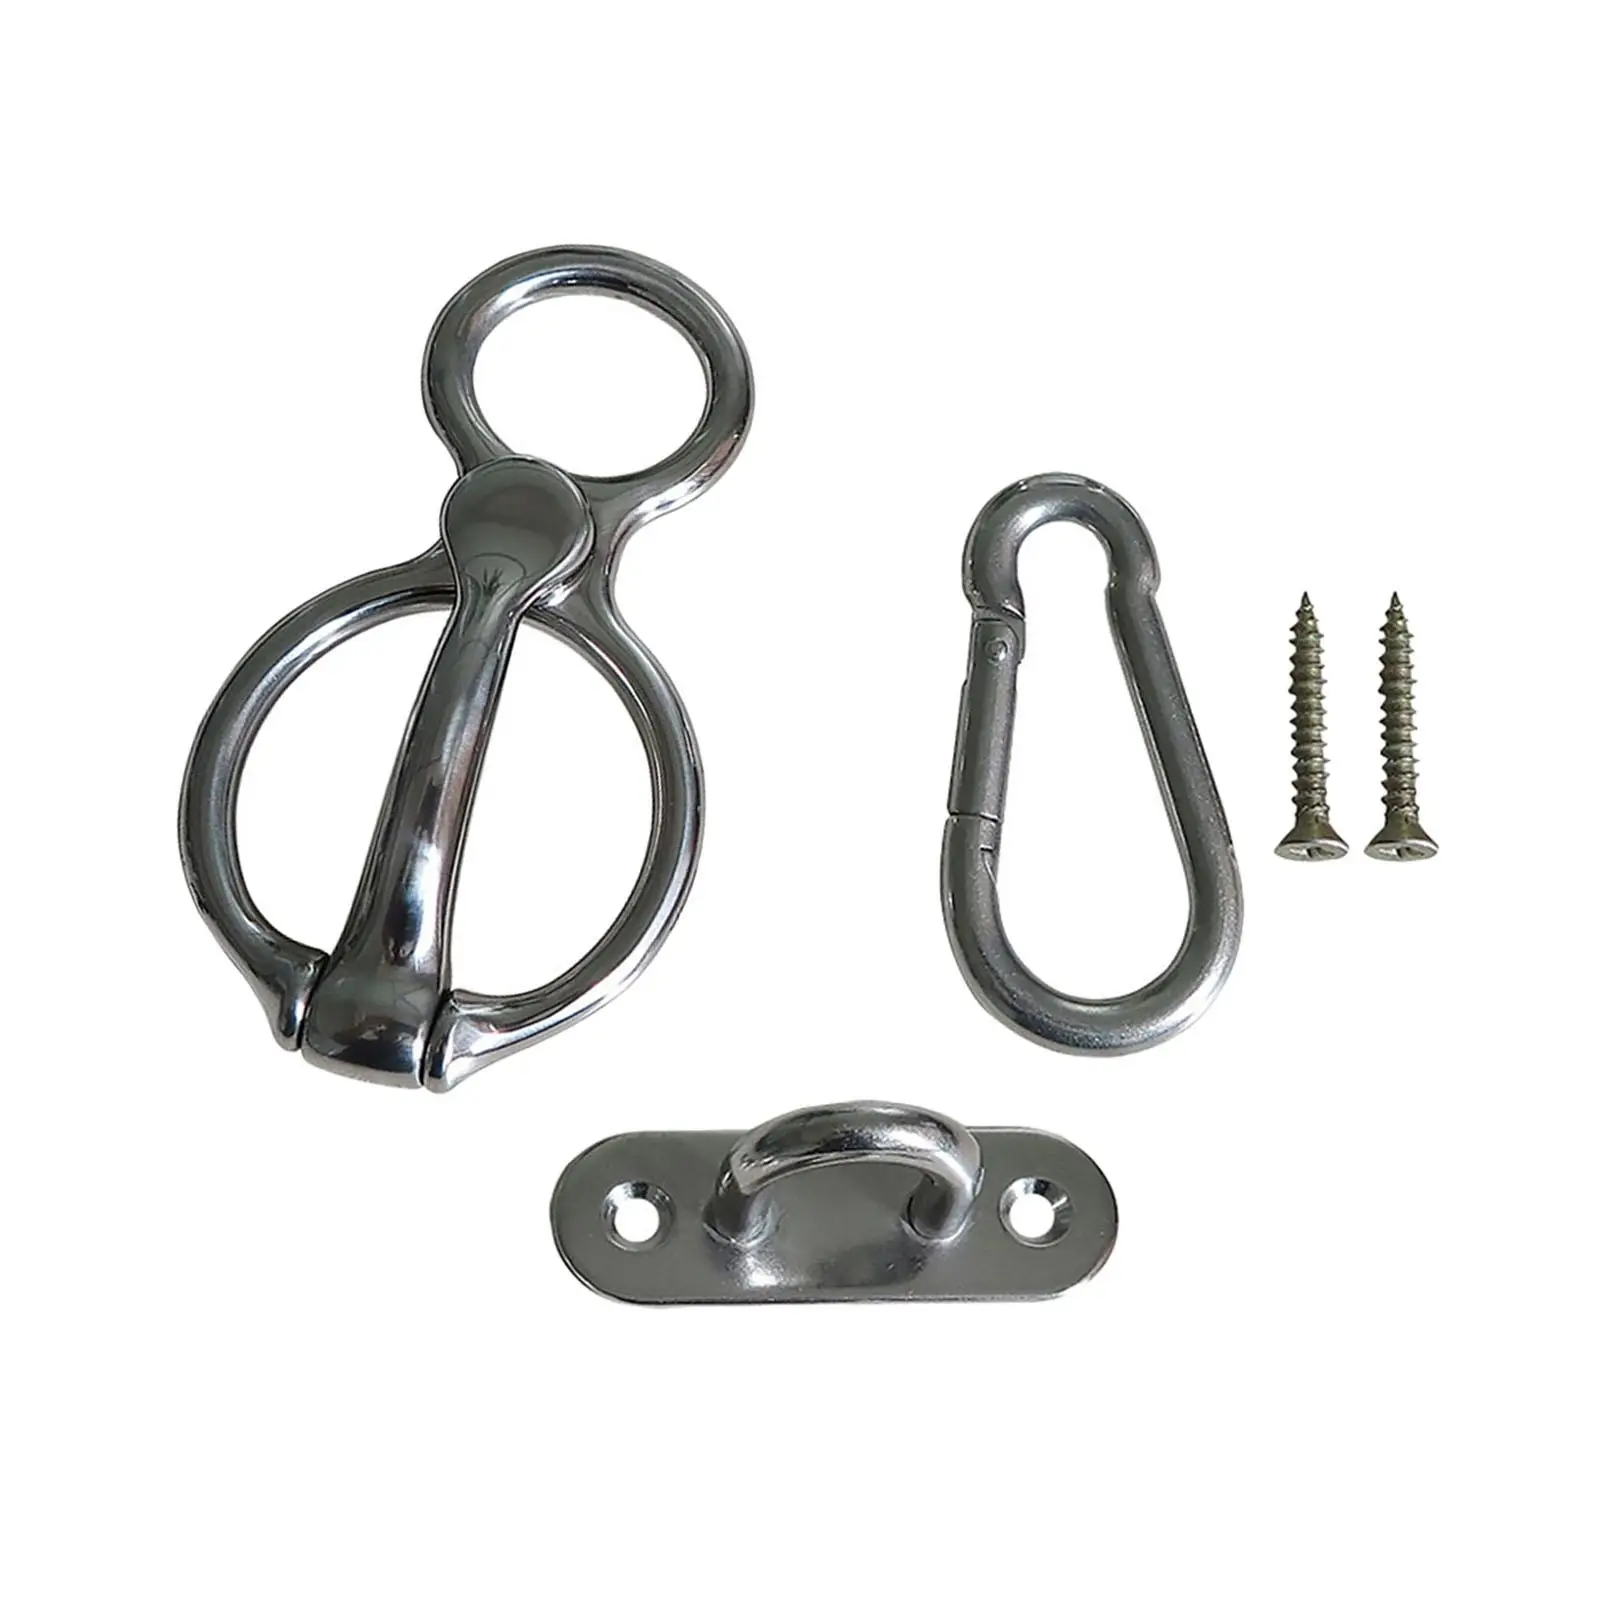 Horse Tie Ring Durable Stainless Steel Prevent Horses from Pulling Back Livestock Tie Off Training Equipment Stable Accessories